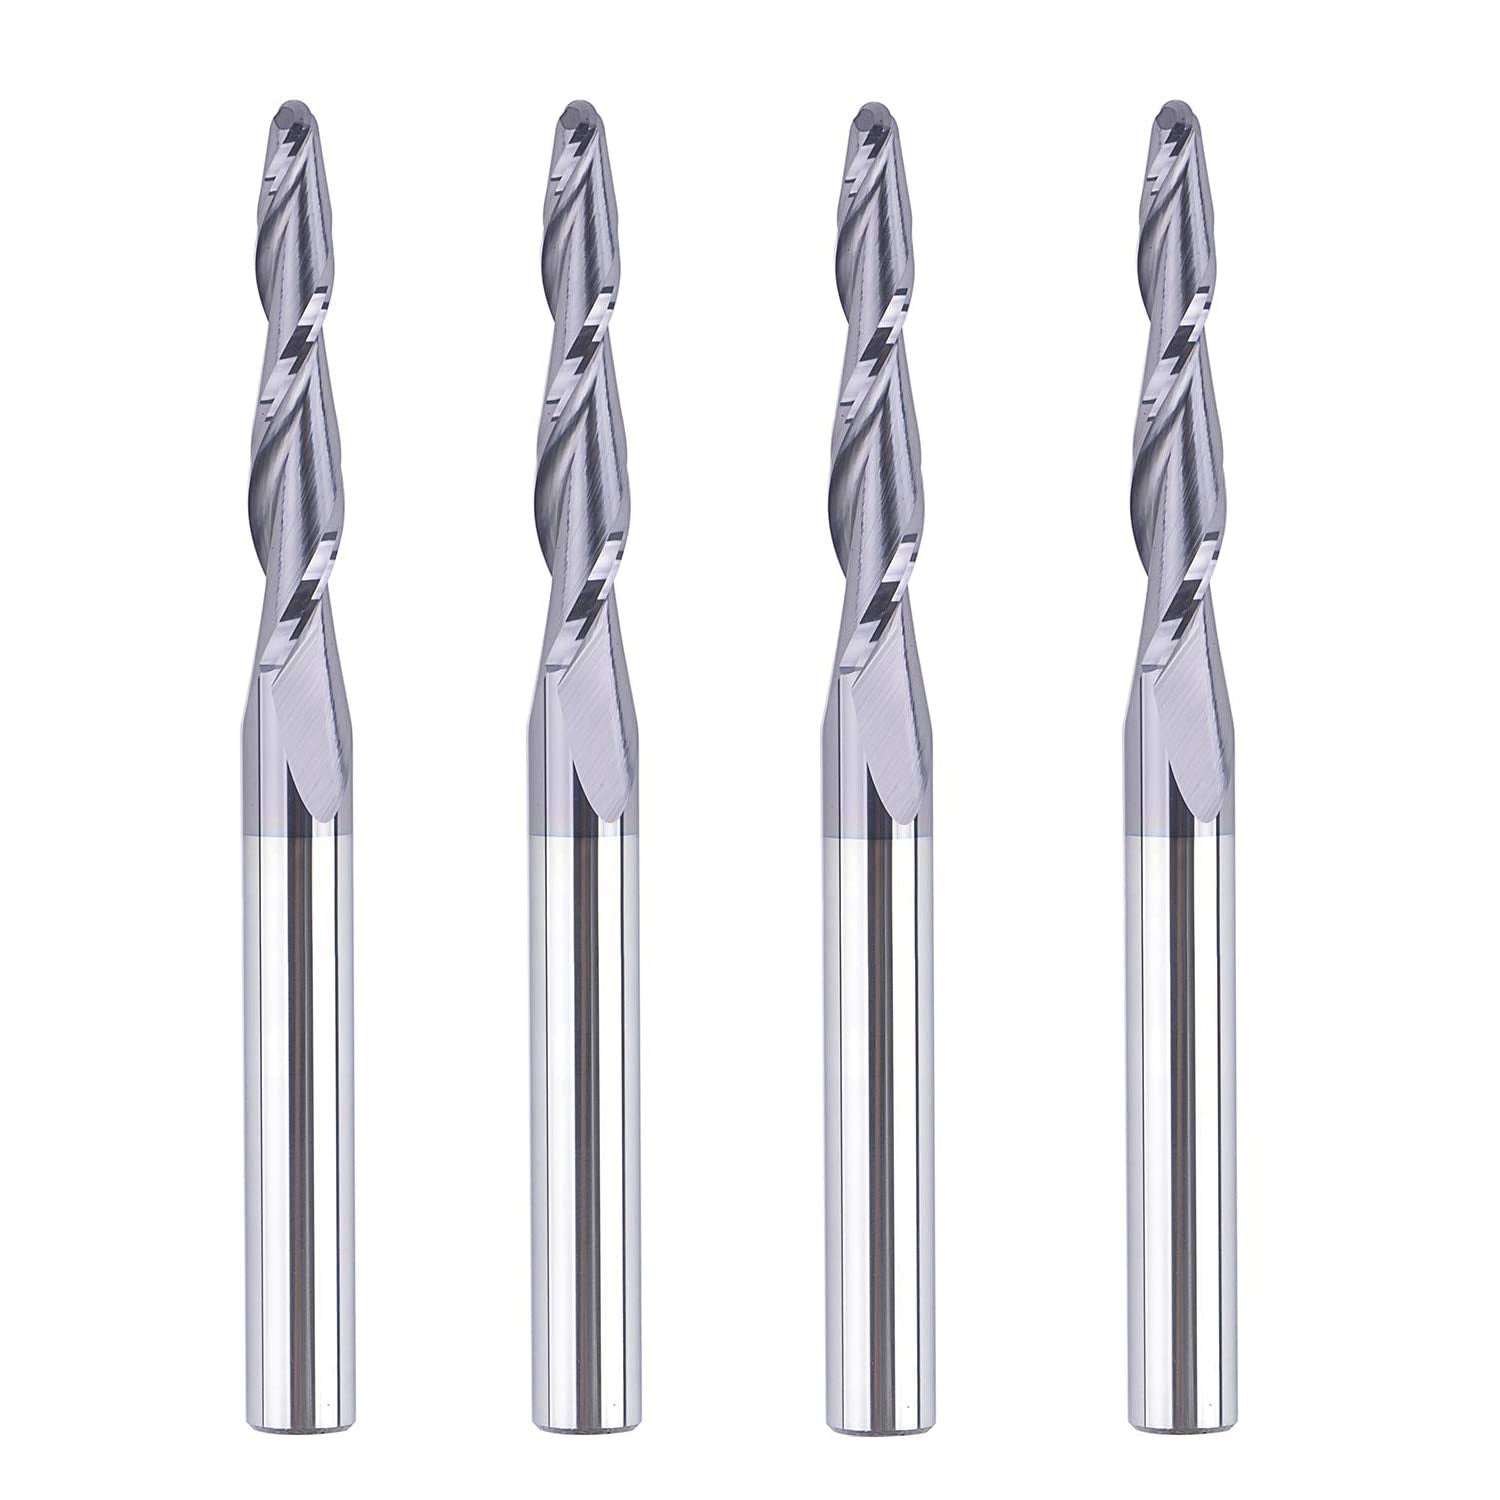 SpeTool W01017 CNC 2D and 3D Carving 2.2 Deg Tapered Angle Ball Nose 2.0mm Radius x 1/4" Shank x 1-1/4" Cutting Length x 3" Long 2 Flute SC TiAlN Coated Upcut Router Bit